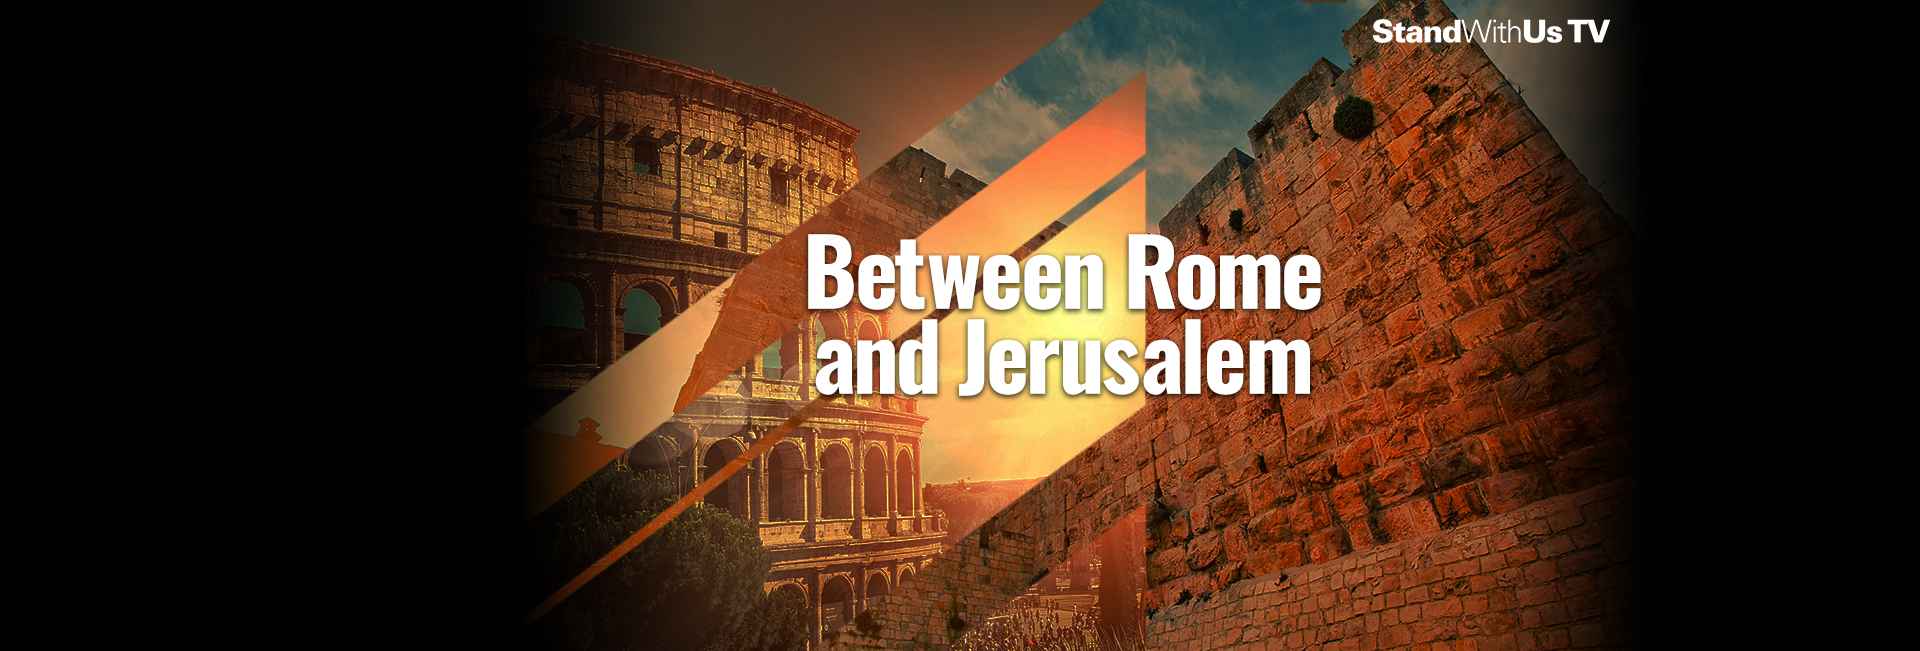 Between Rome and Jerusalem Episode 3: Holocaust, Hate, and Hope